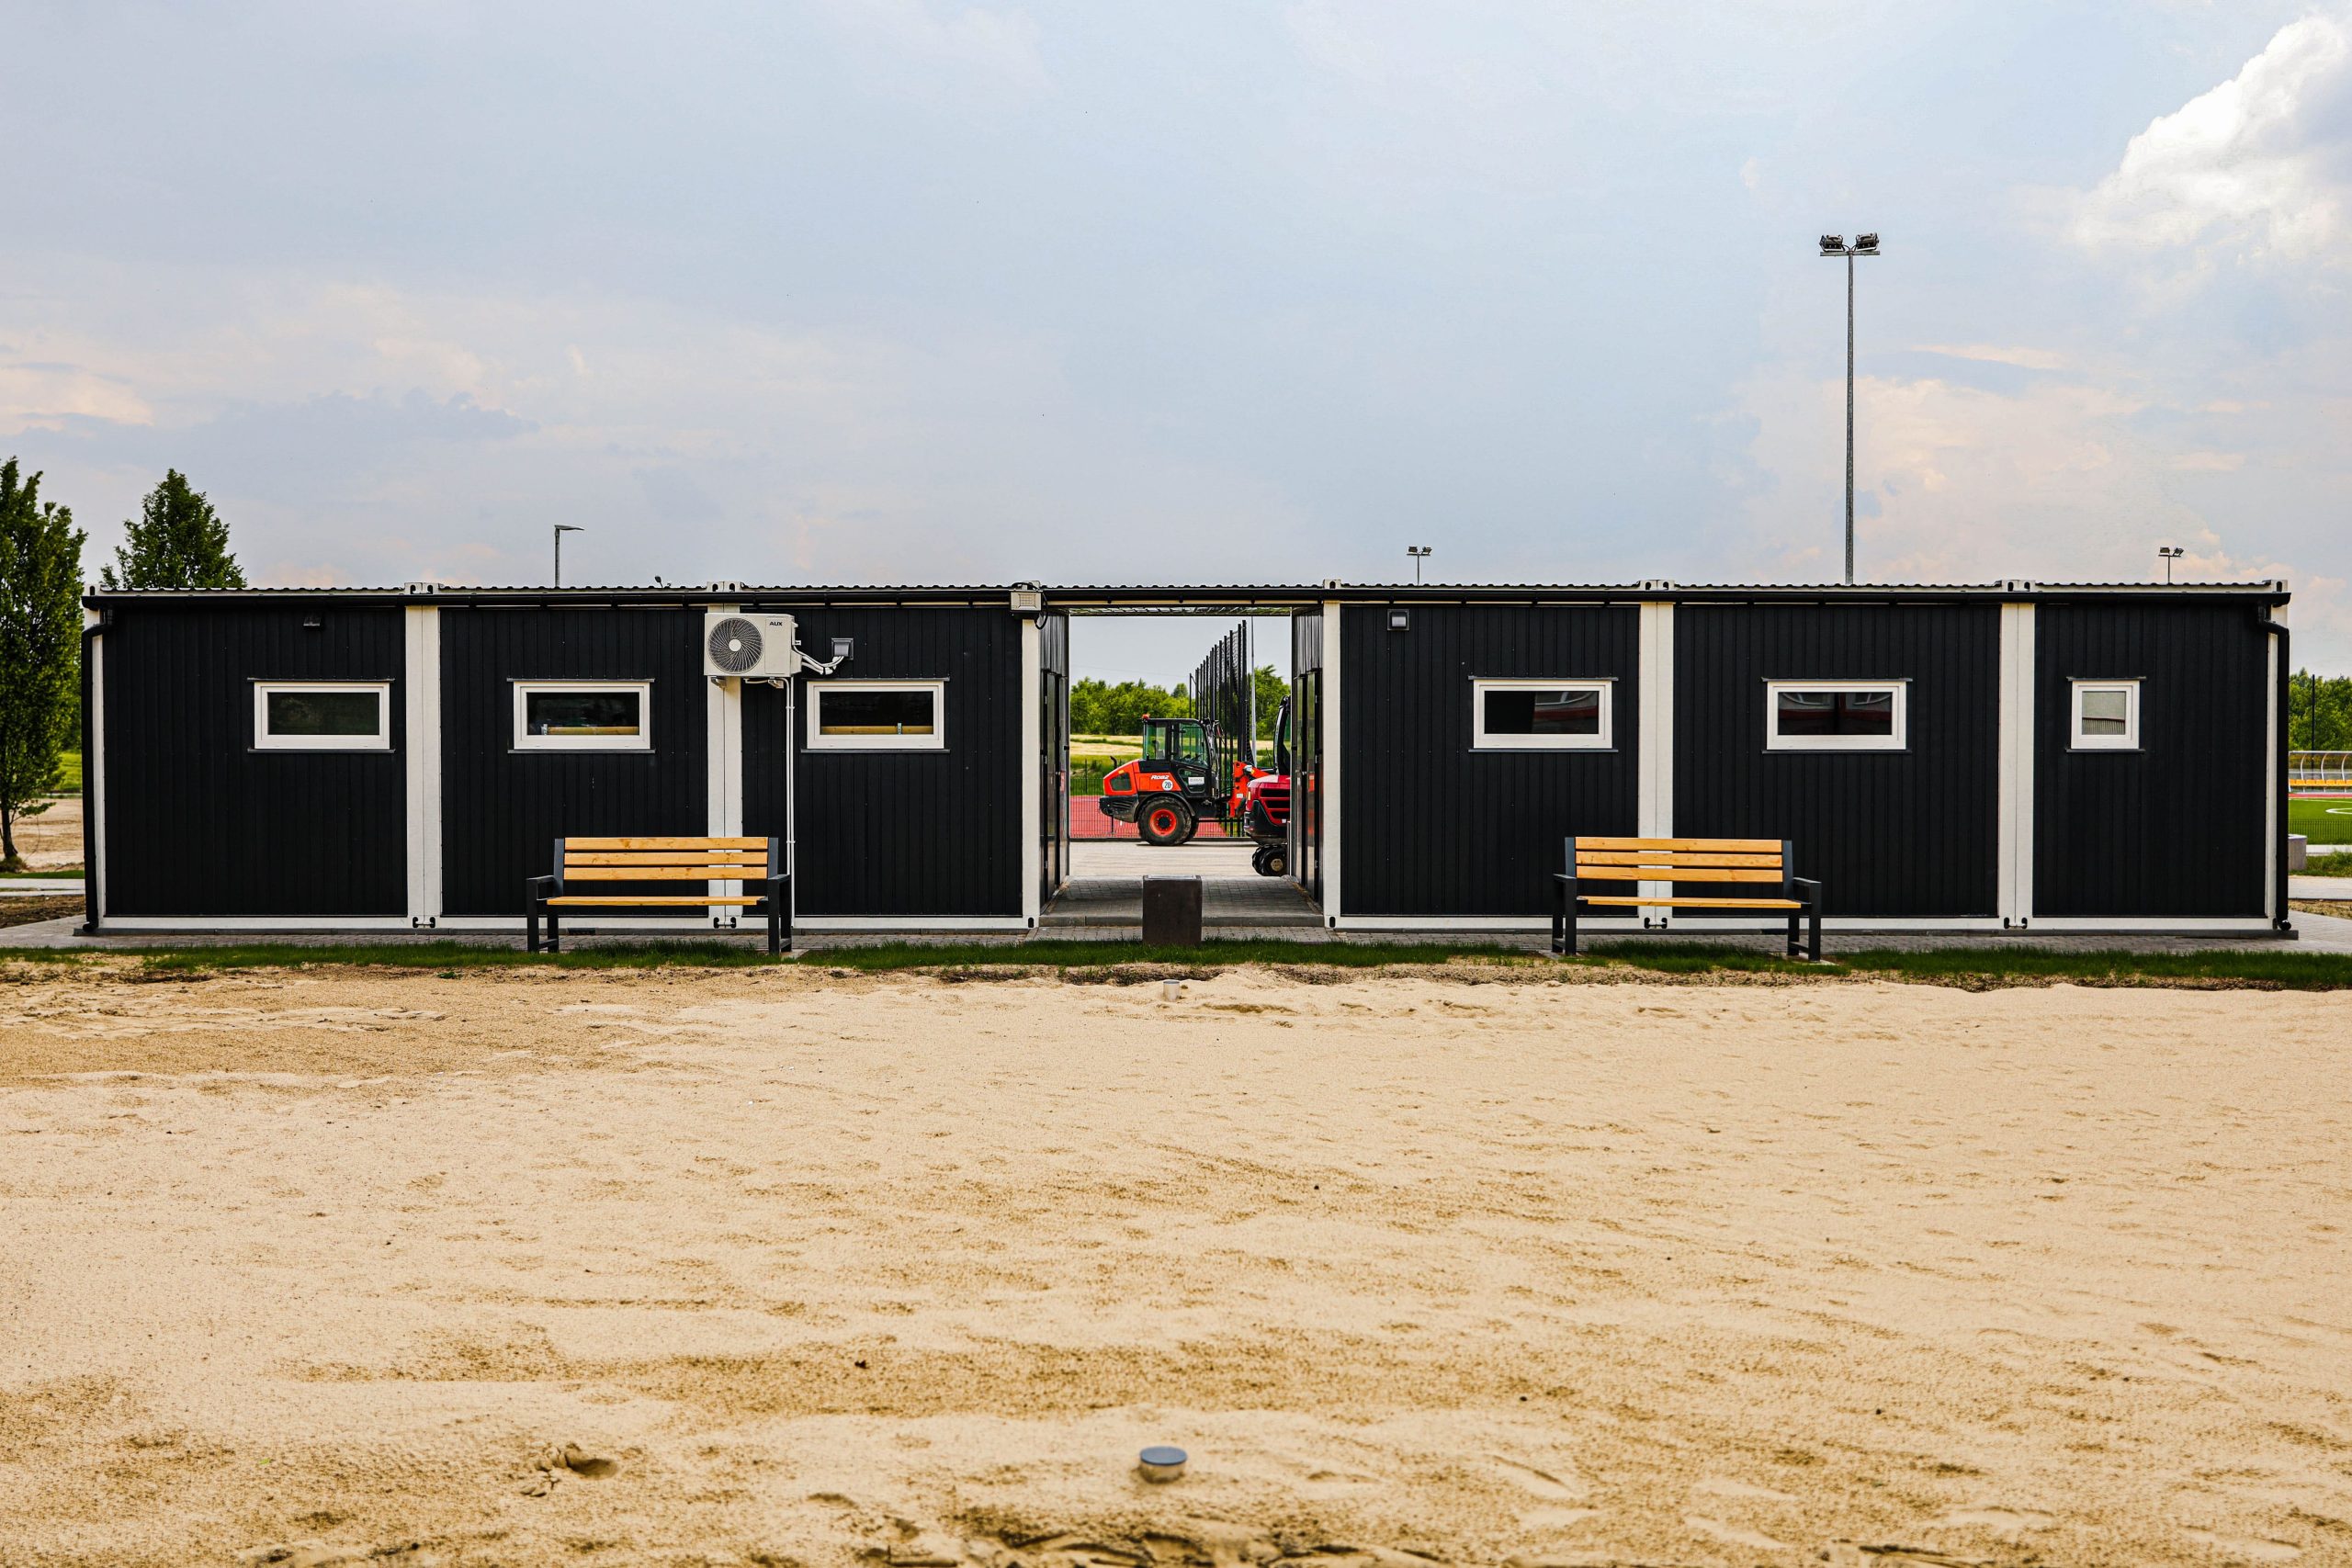 Containers: Creative use in creating public spaces | Ultramodula